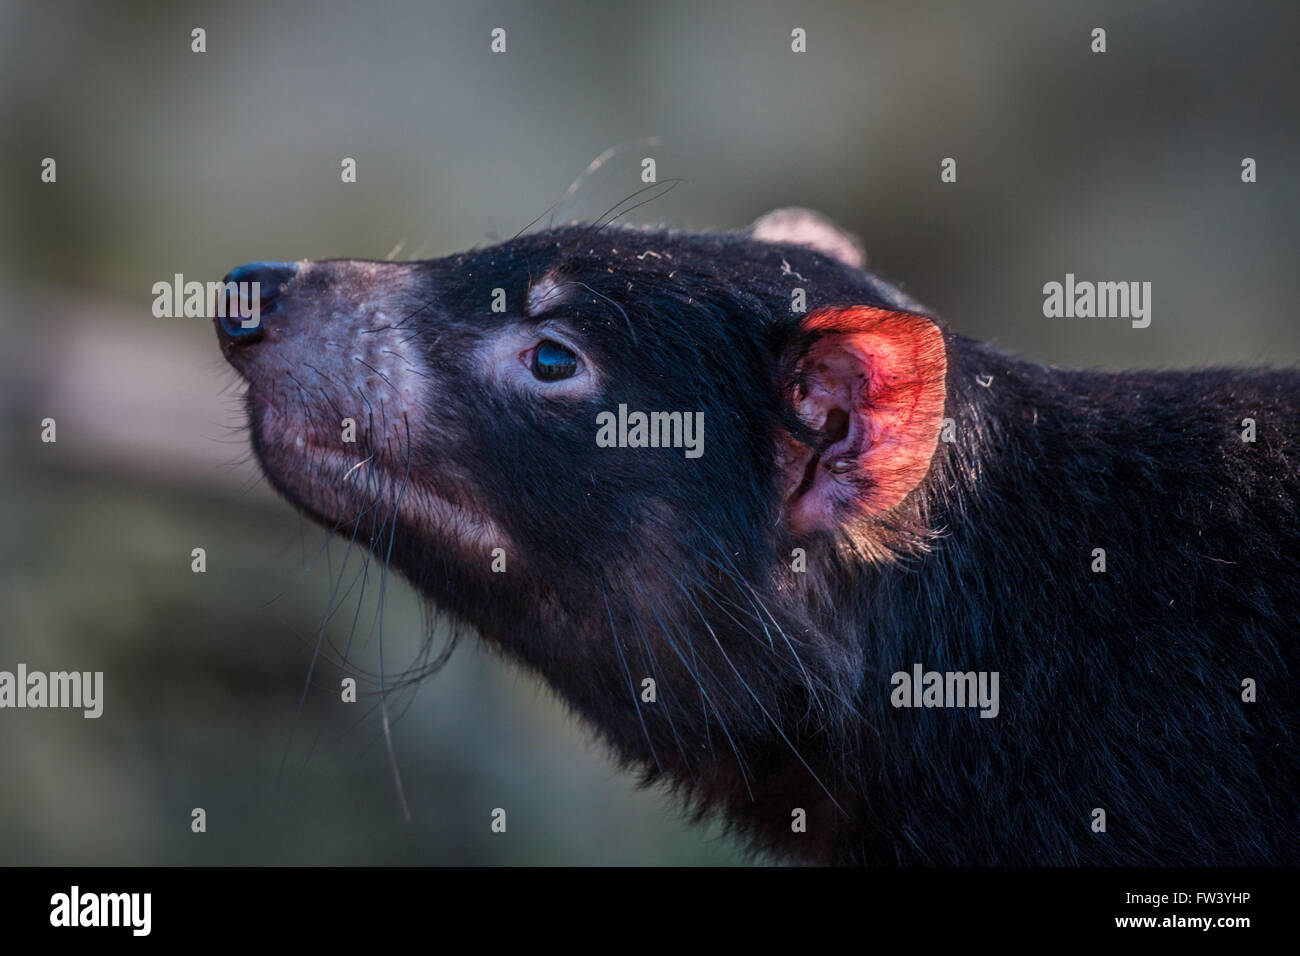 Tasmanian devil close-up with a red ear Stock Photo